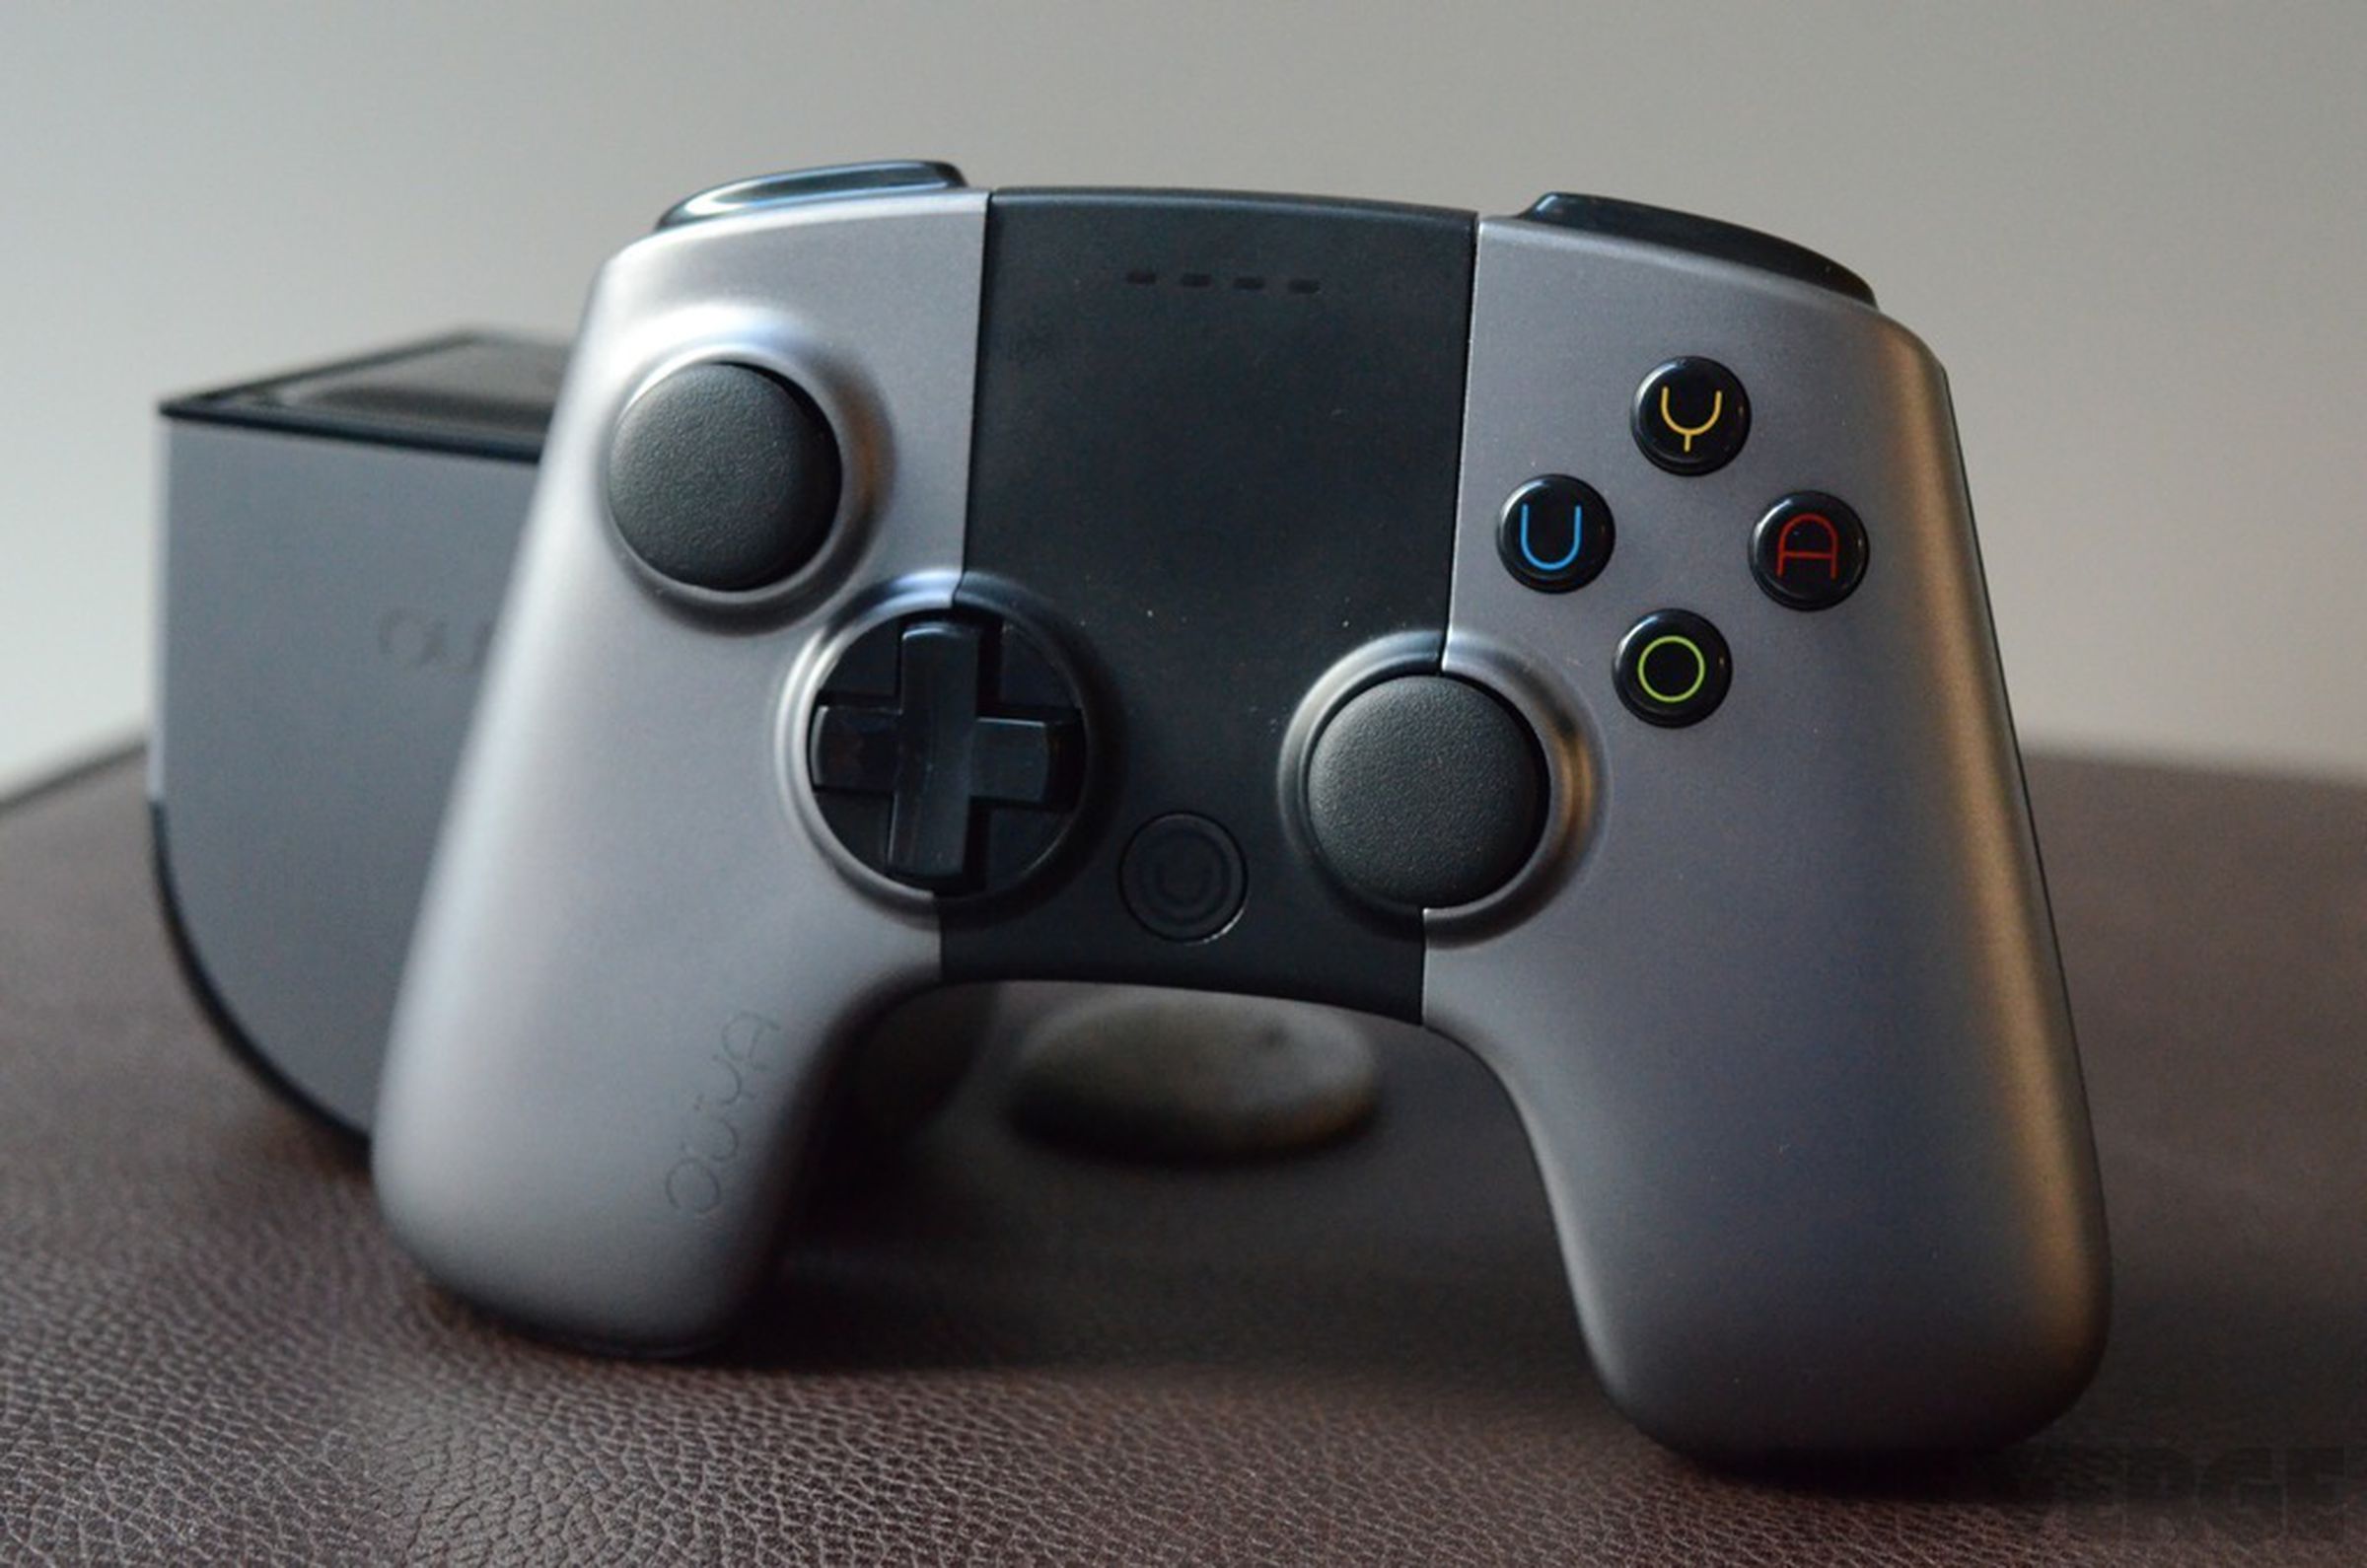 Ouya hands-on pictures